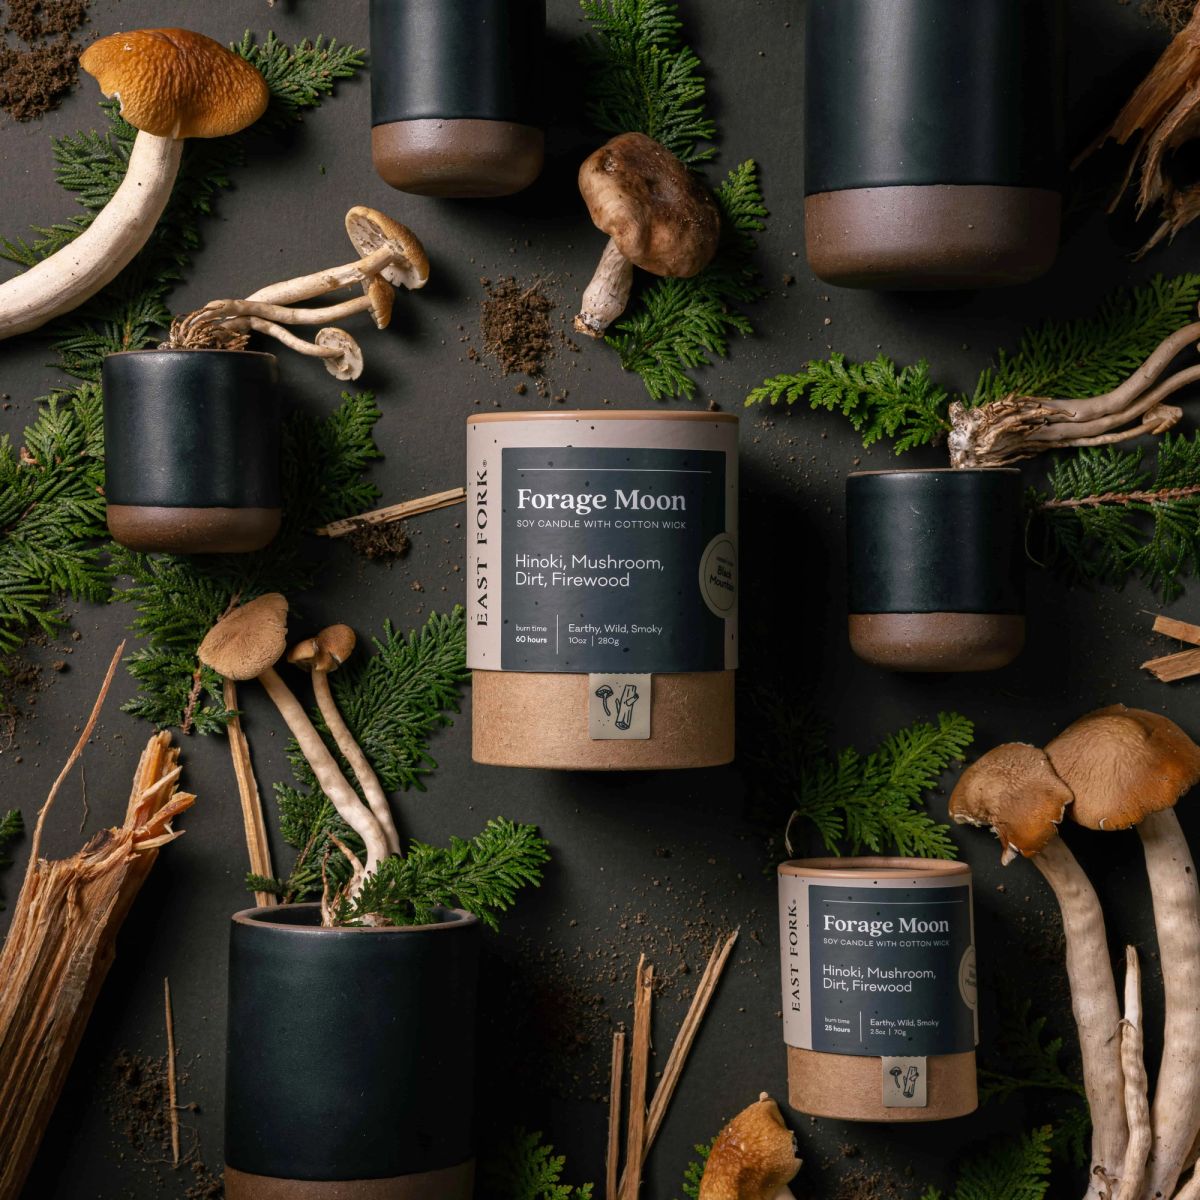 A cylindrical ceramic vessel in an muted charcoal color laying on its side - mushroom, greenery, and firewood are artfully styled coming out of the top of the candle to reflect the scent.